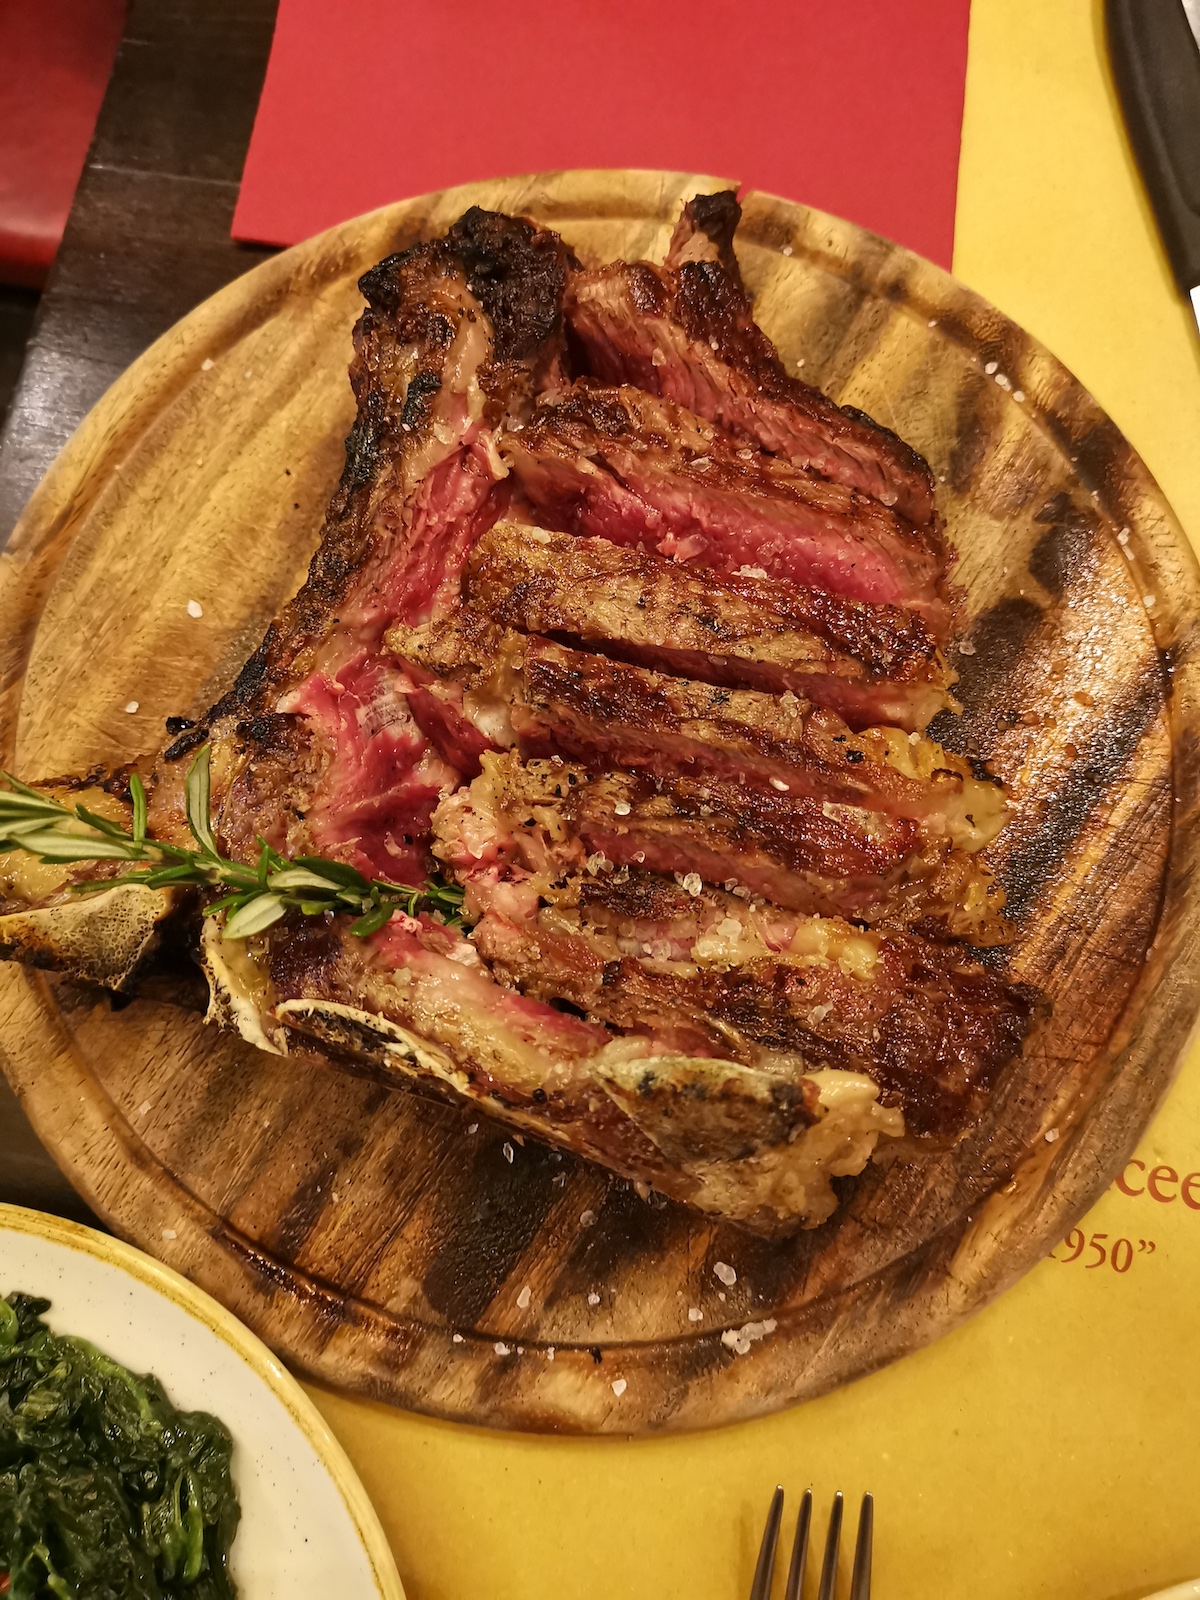 Overhead shot of sliced rare steak on a wooden plate garnished with herbs